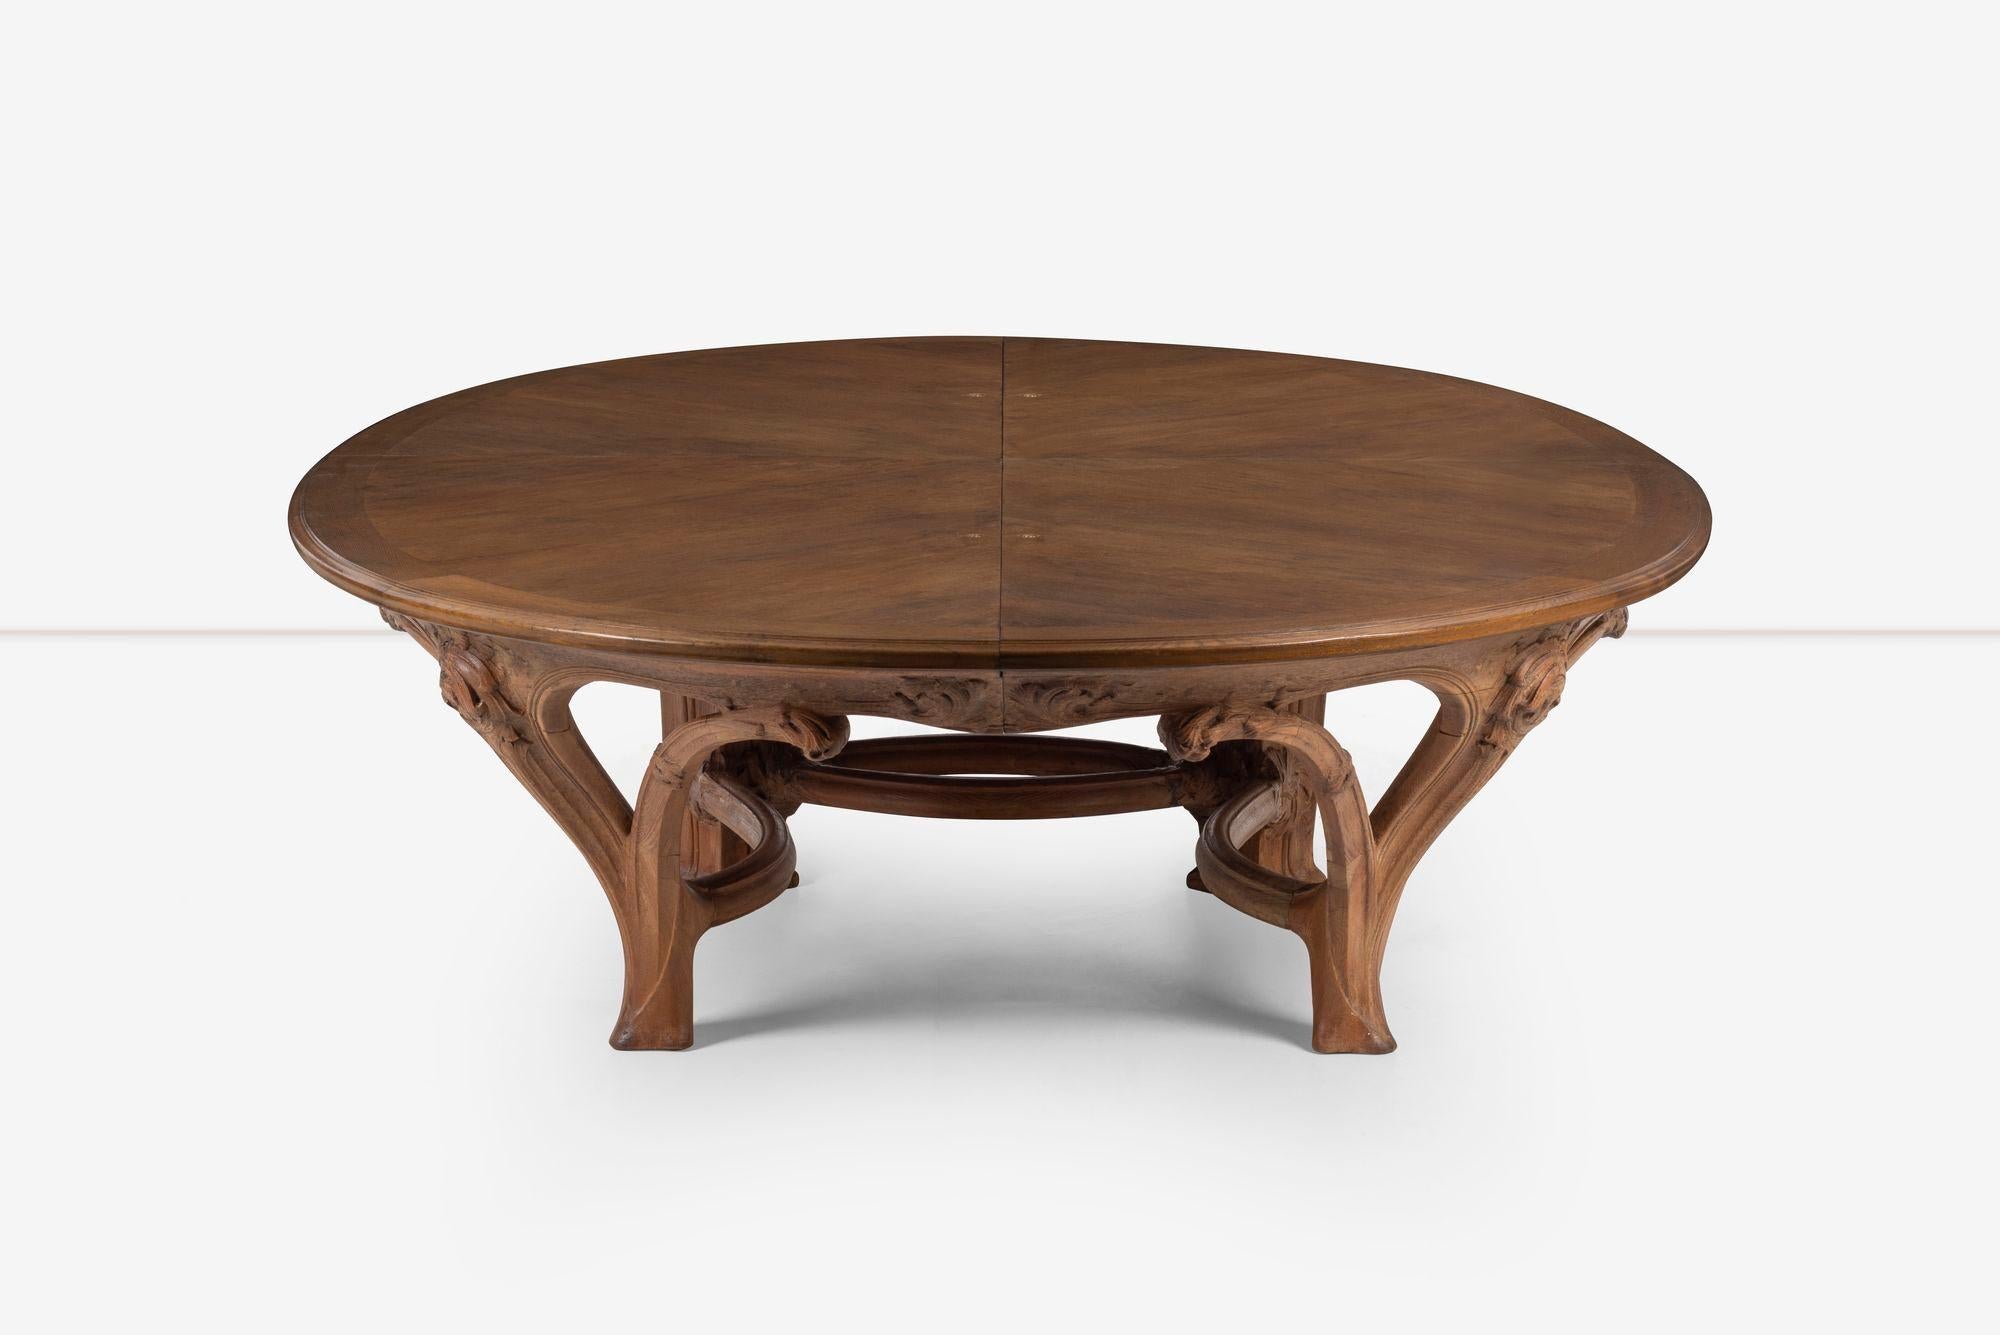 Early 20th Century Monumental Art Nouveau Dining Table Attributed to Victor Horta from the Firehous For Sale